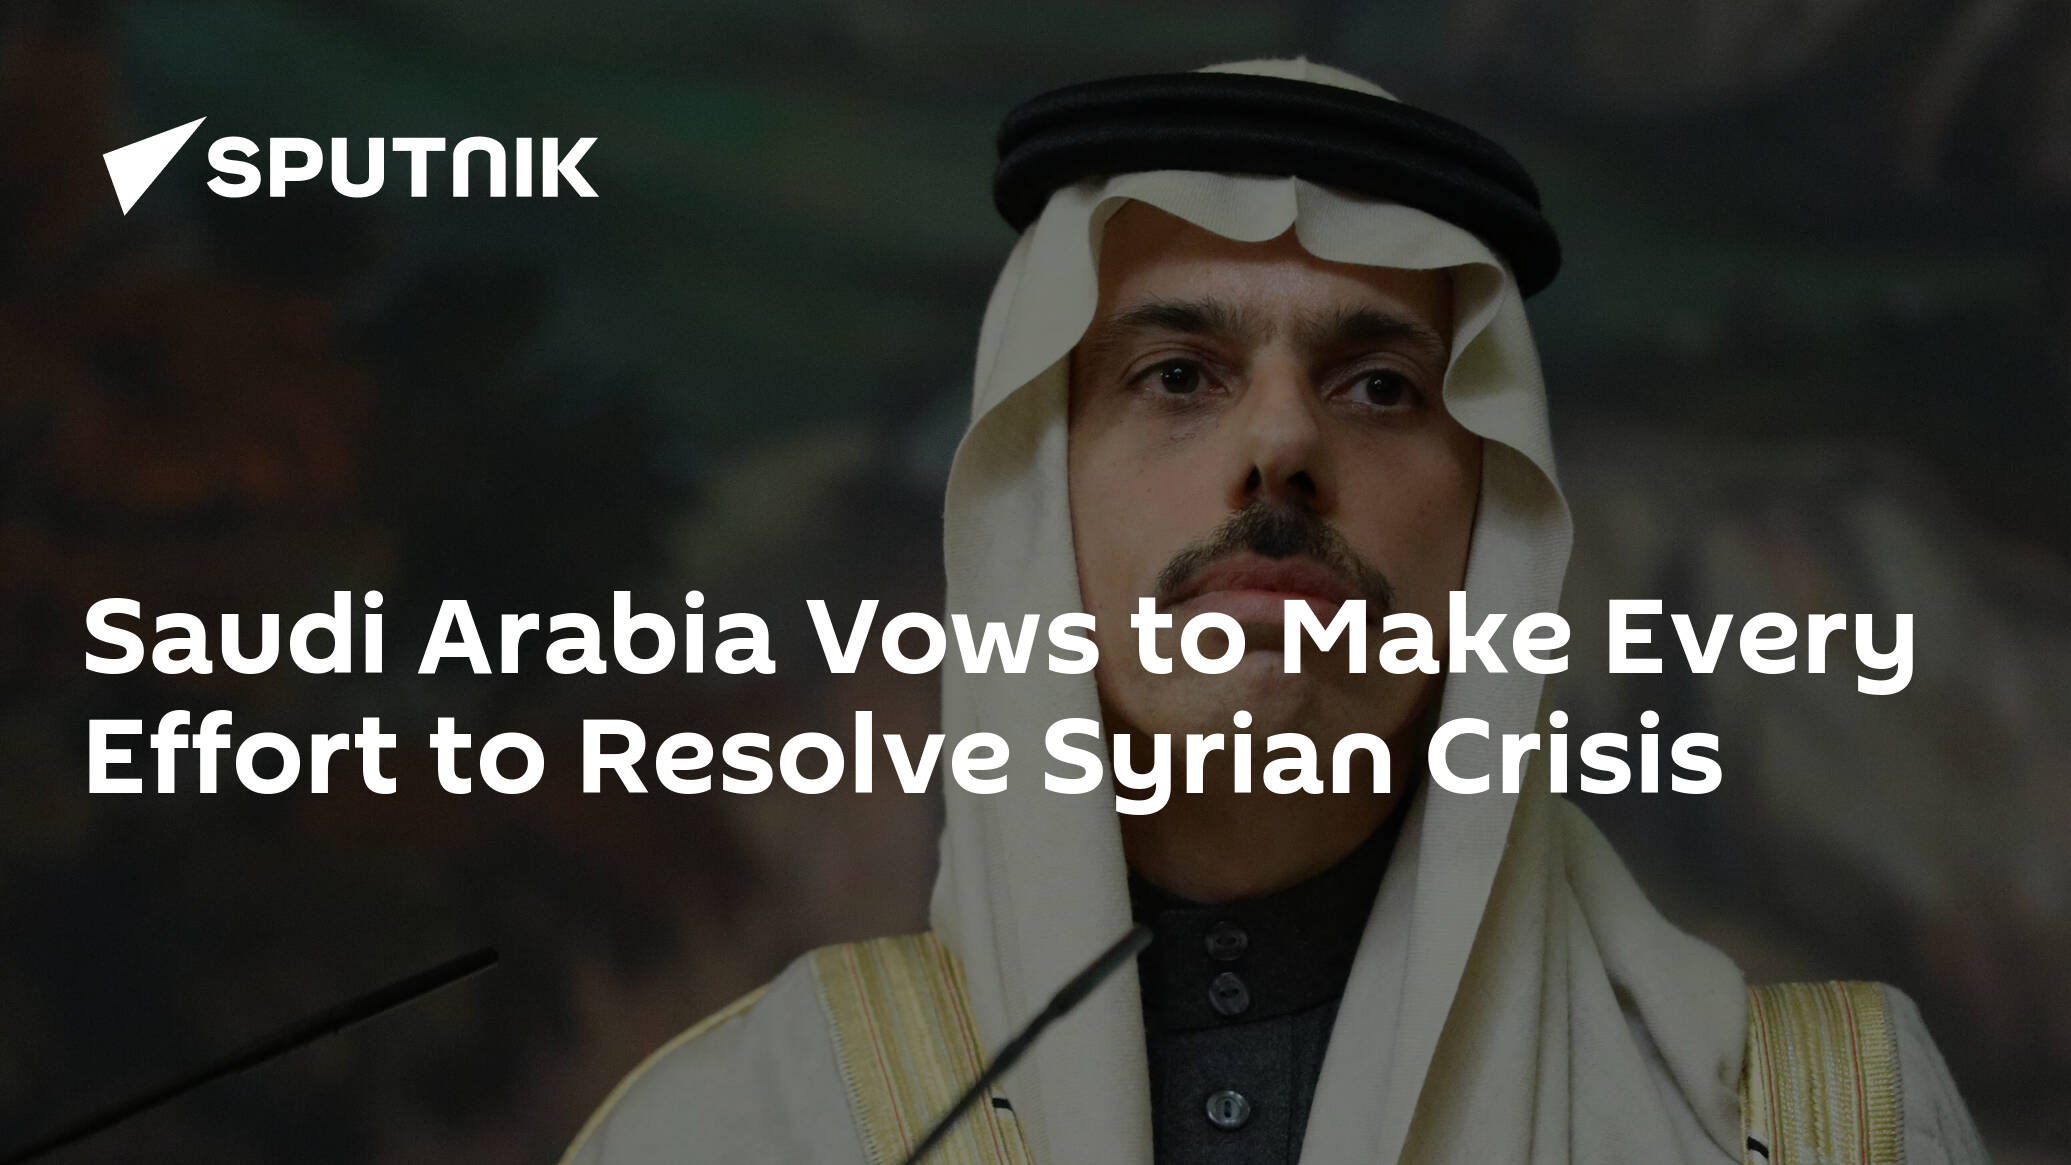 Saudi Arabia Vows to Make Every Effort to Resolve Syrian Crisis